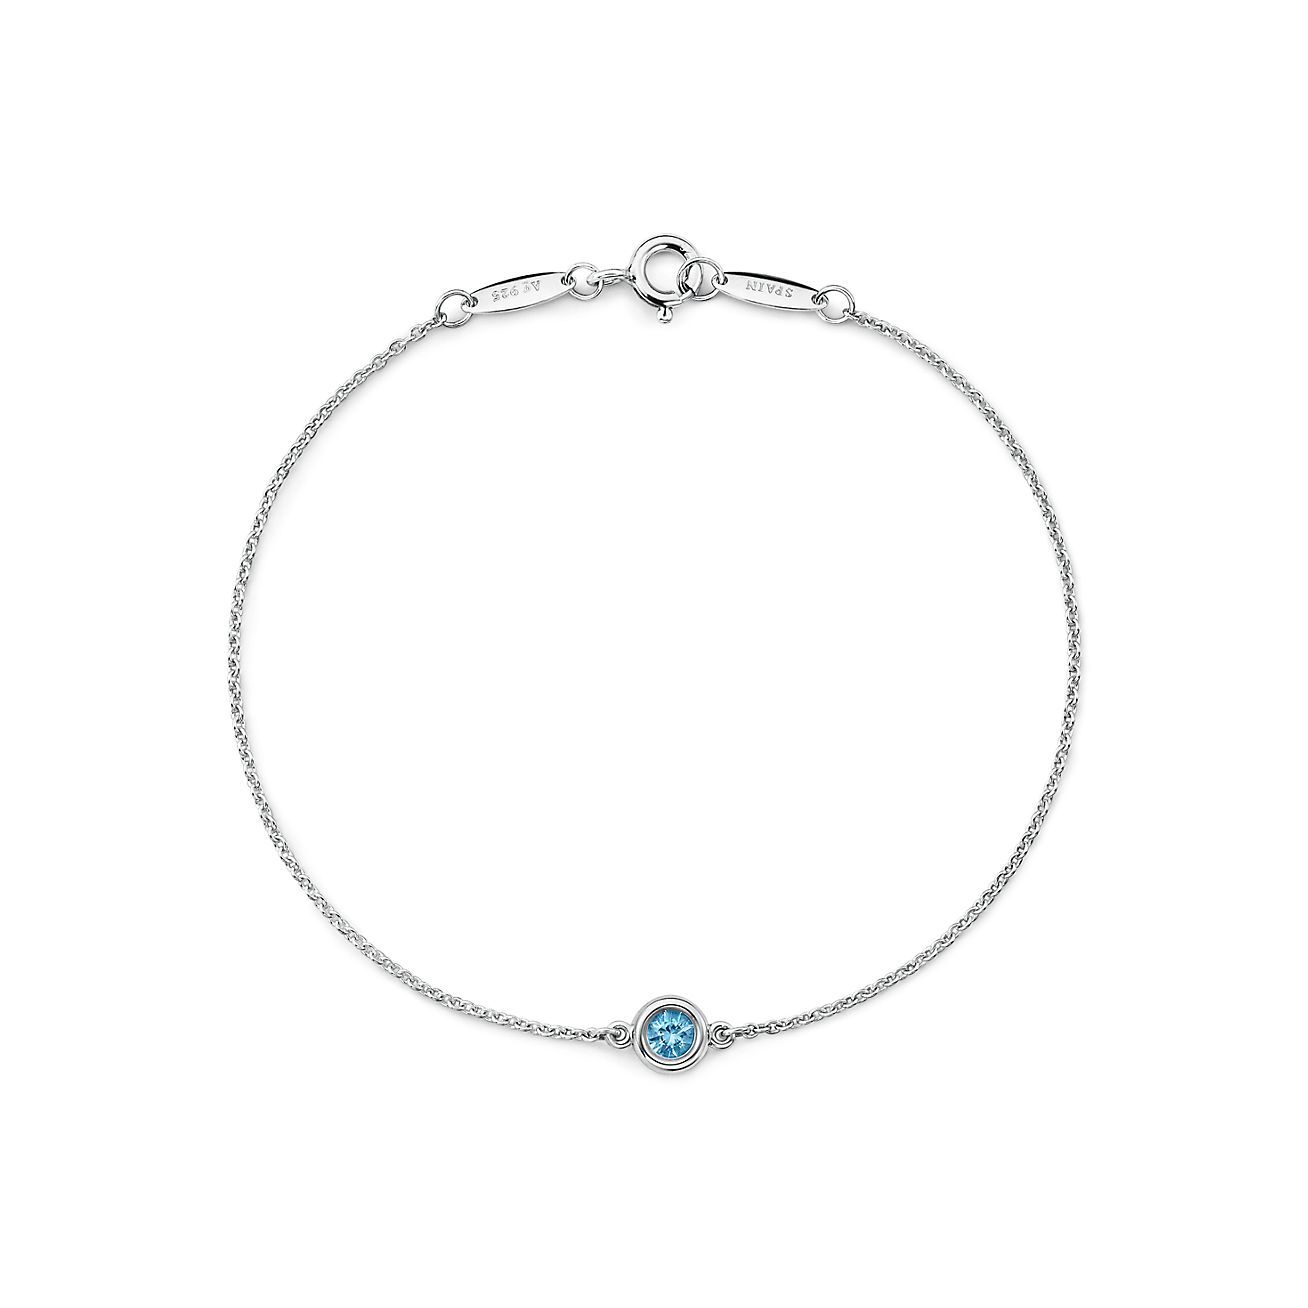 Elsa Peretti® Color by the Yard bracelet in sterling silver with an aquamarine. 